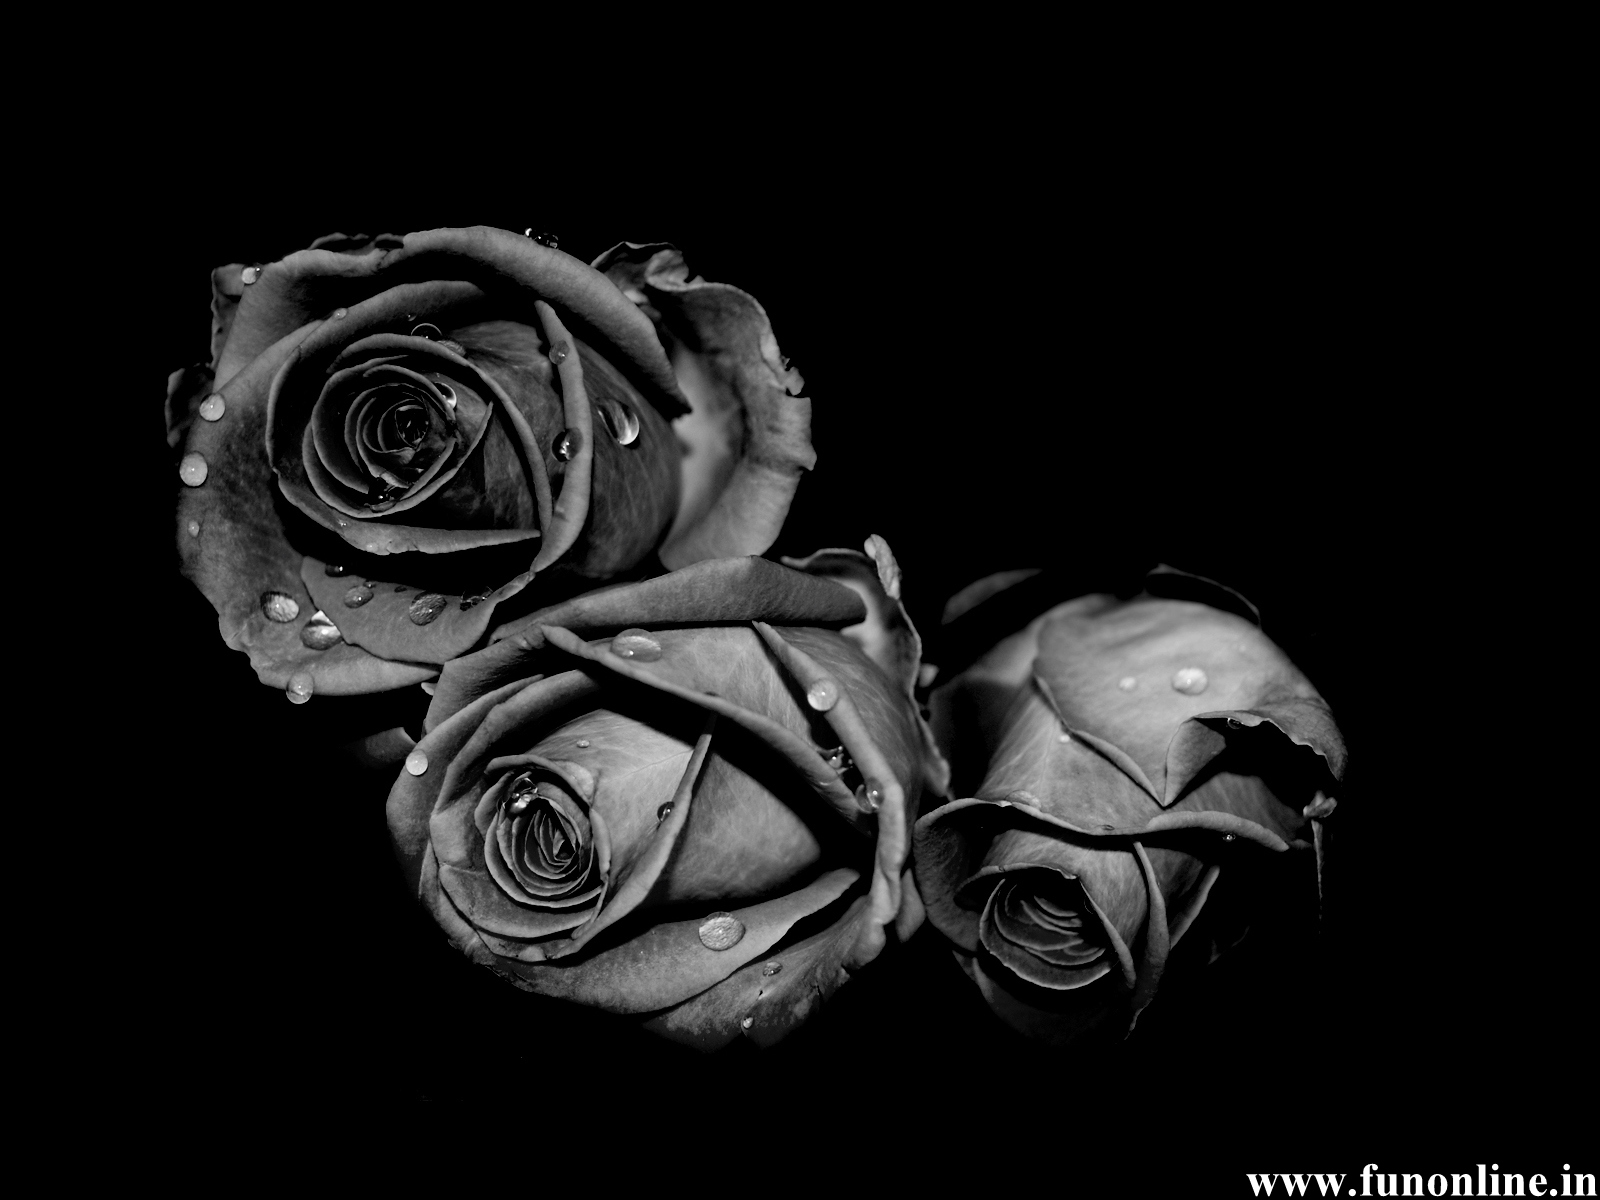 Water Rose Hd Wallpaper - Black And White Roses Hd , HD Wallpaper & Backgrounds